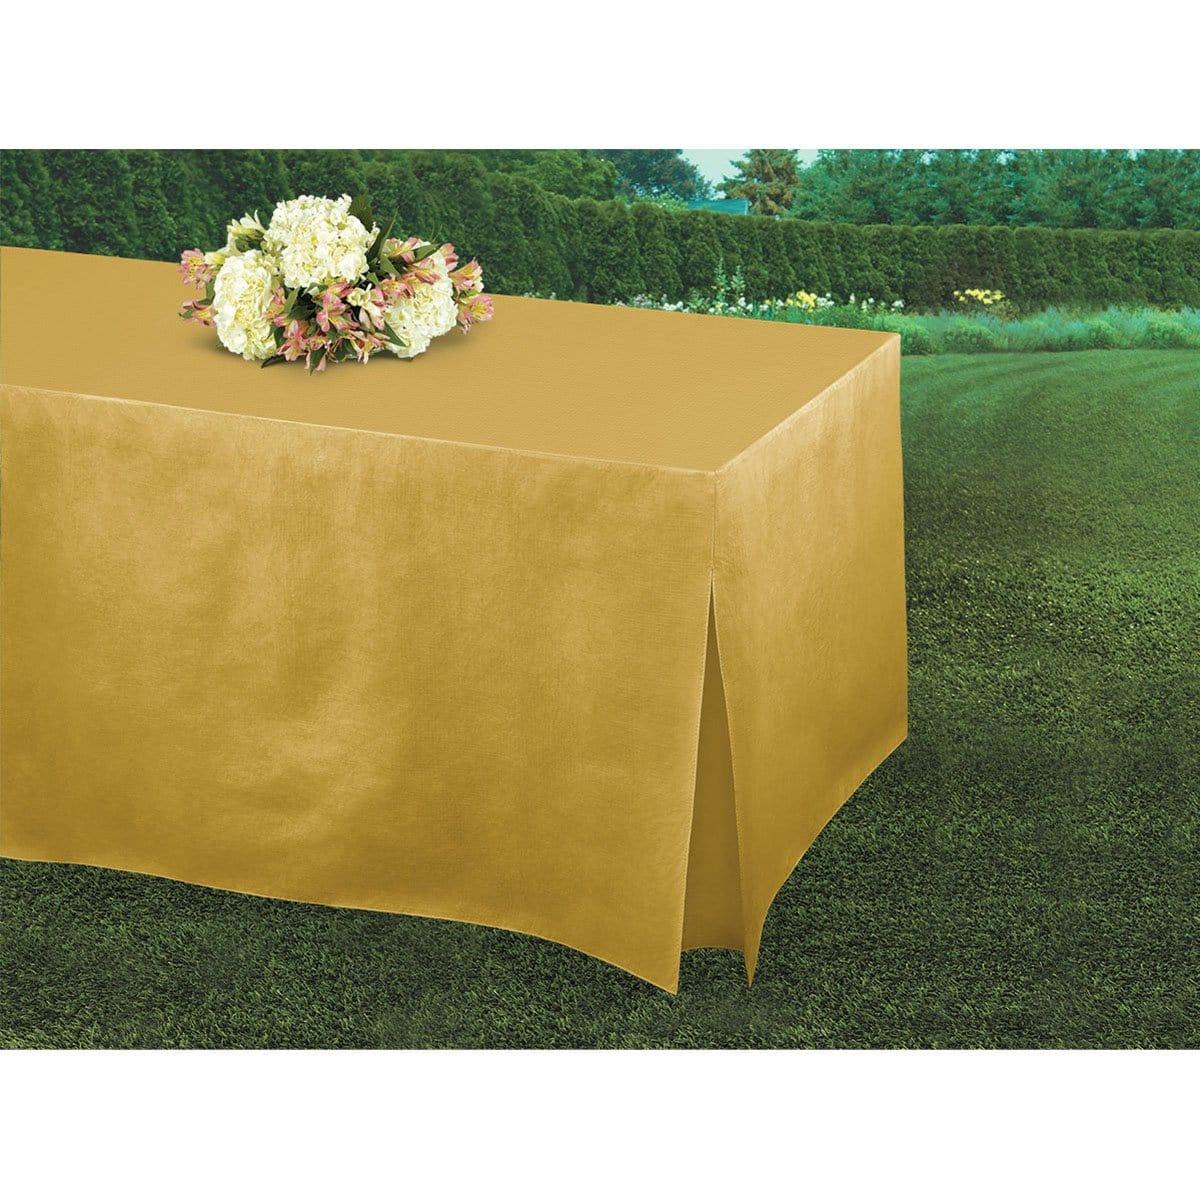 Buy Plasticware Fitter Tablecover - Gold sold at Party Expert